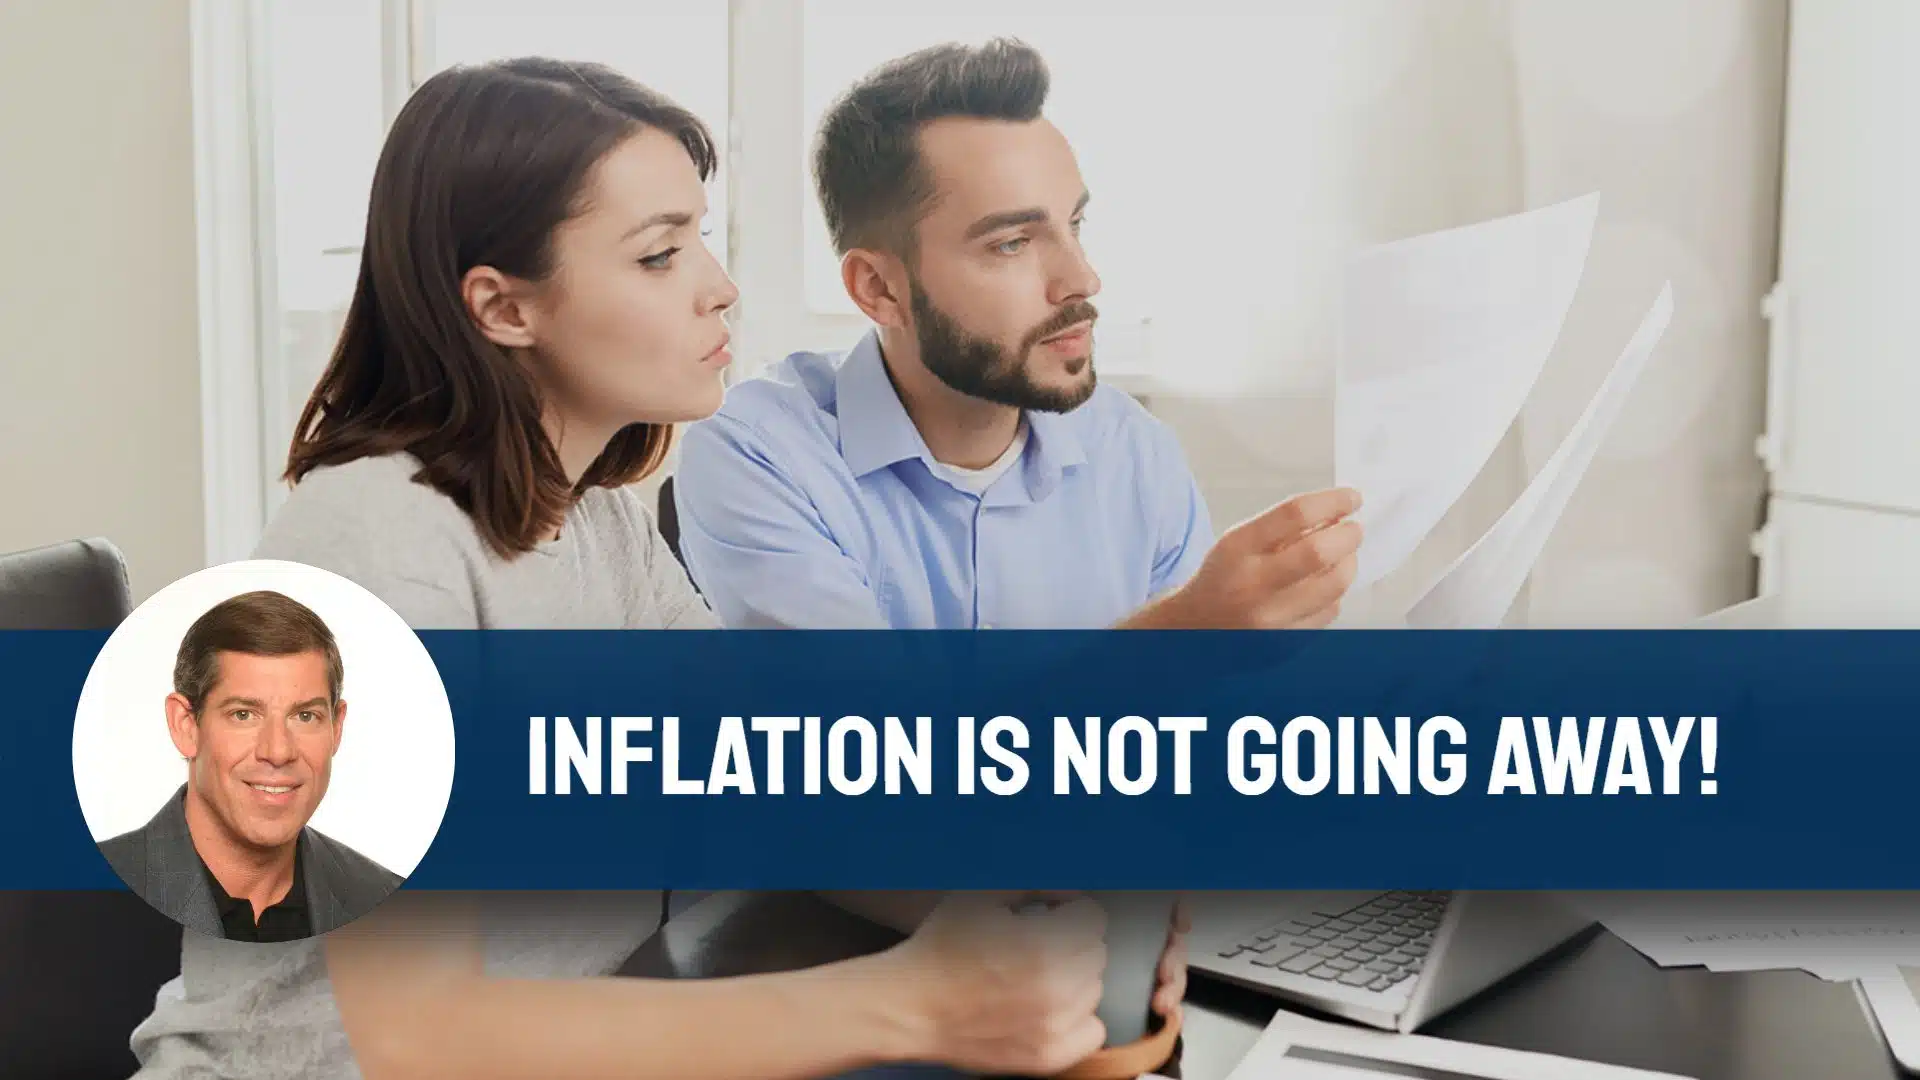 Inflation is Not Going Away